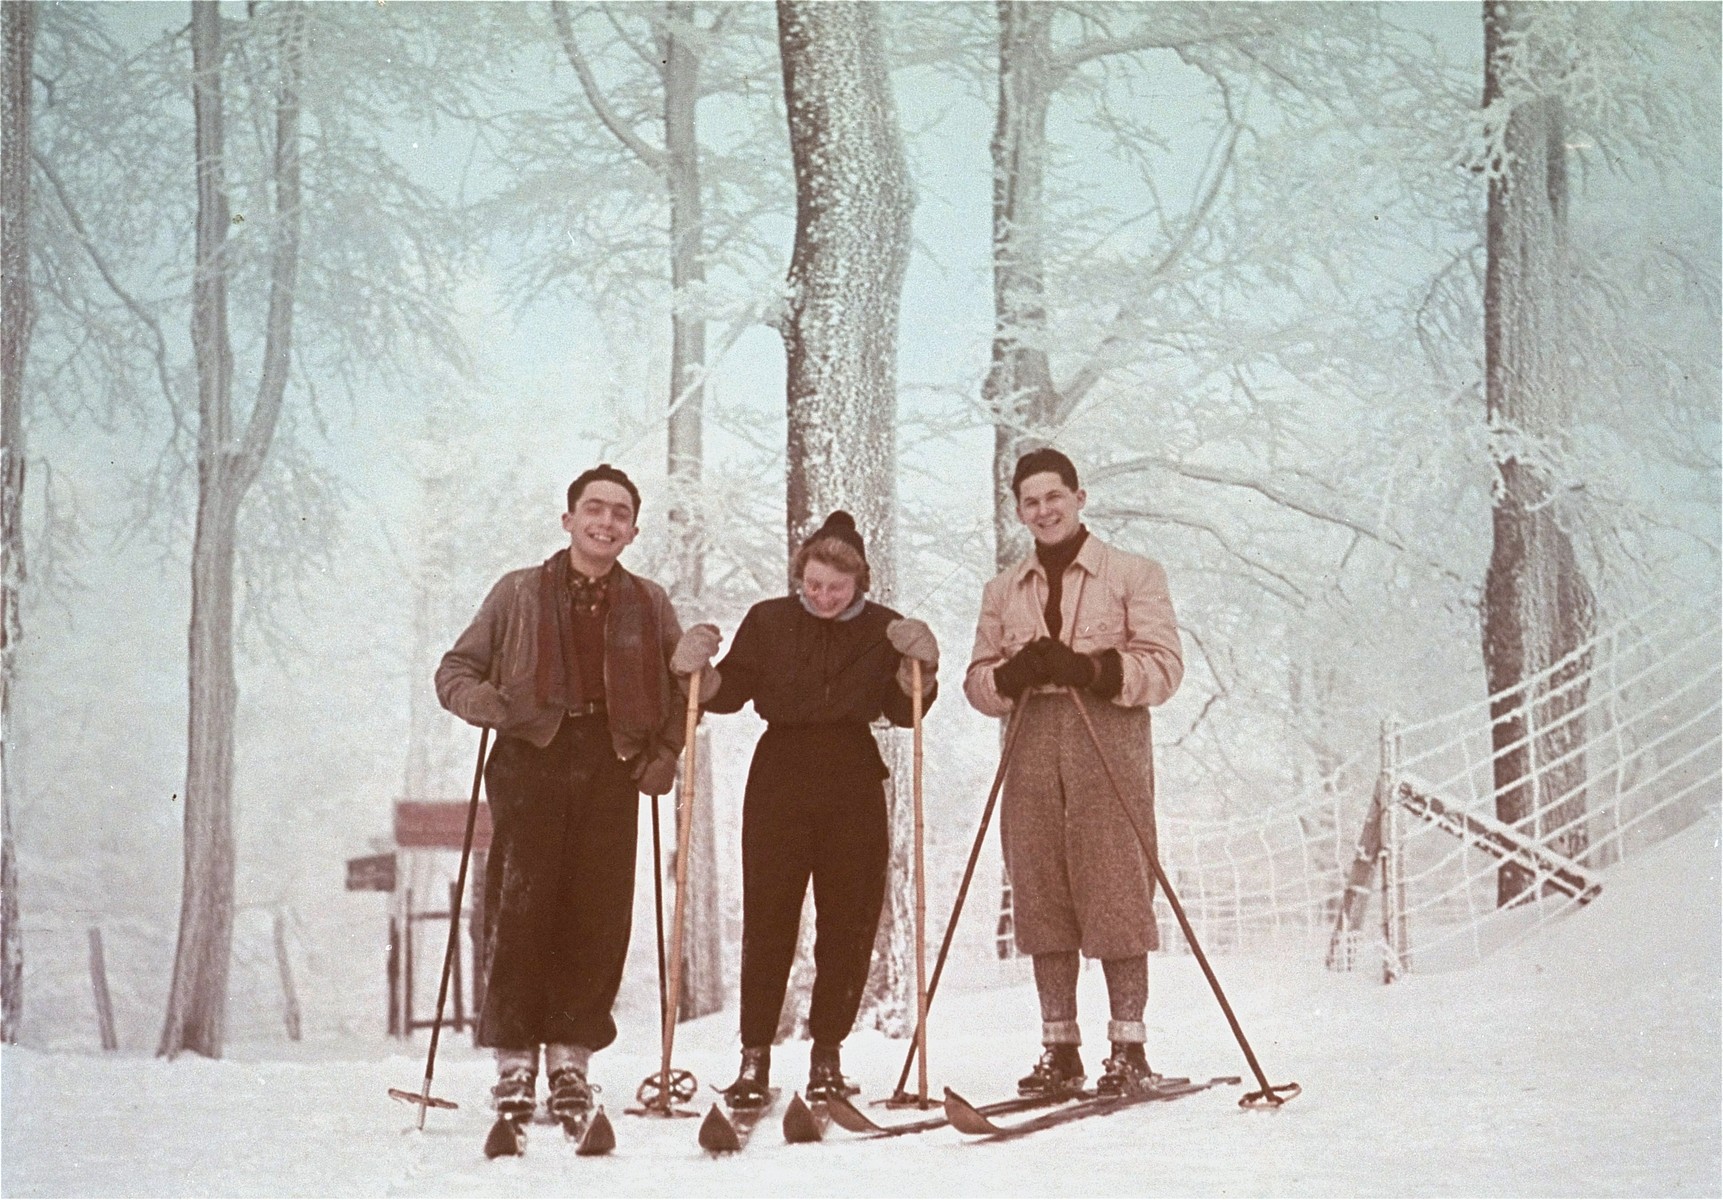 Portrait of Tom Veres with two friends on a ski outing.